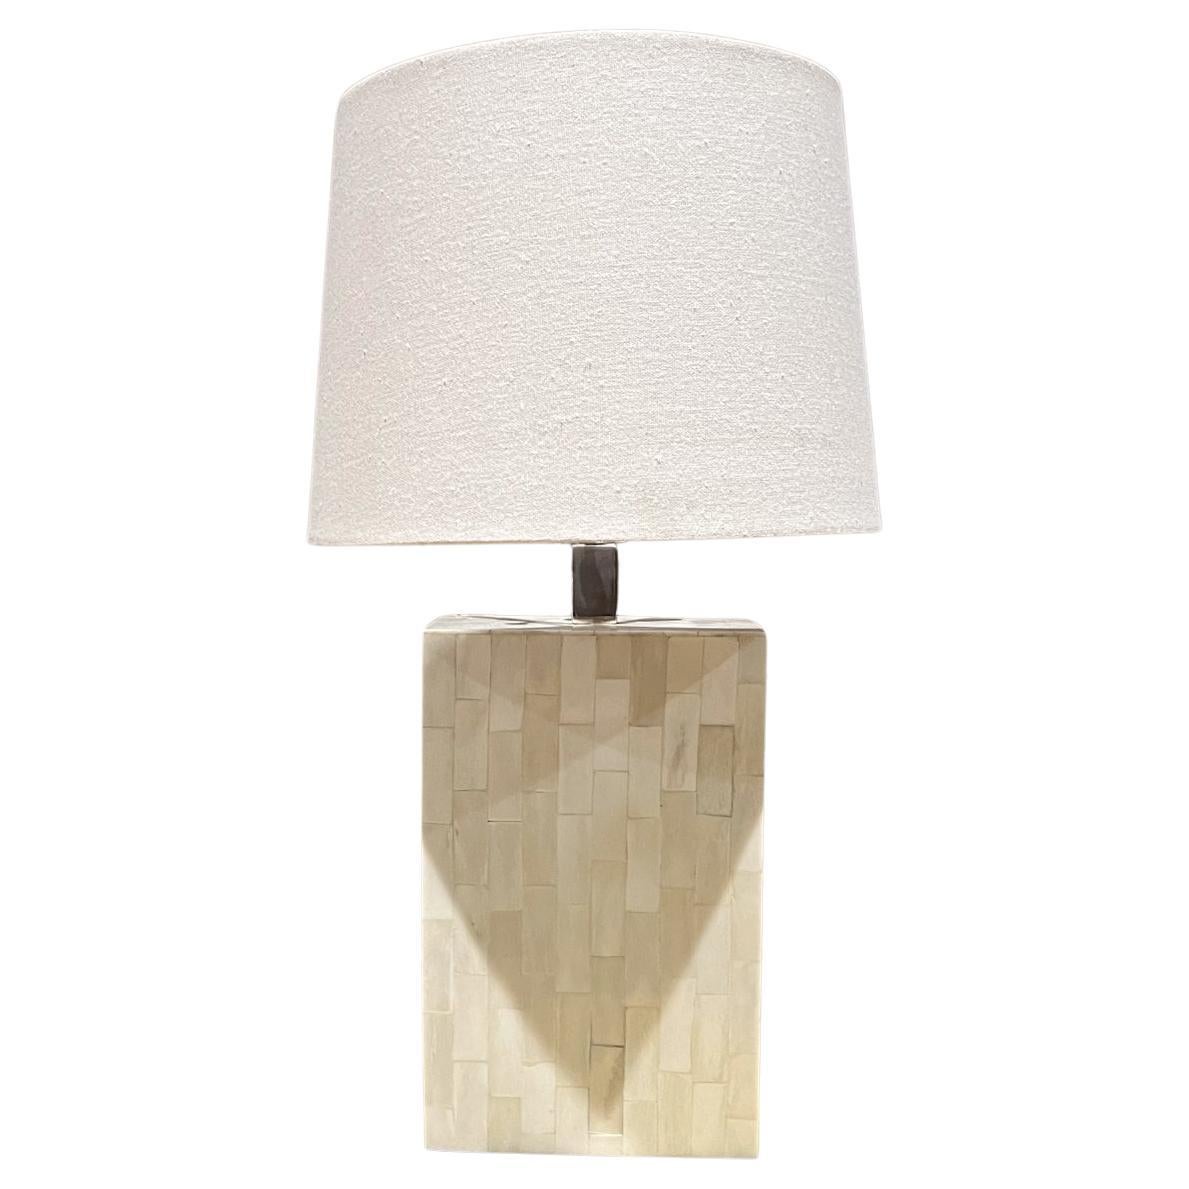 1970s Tessellated Bone Table Lamp Enrique Garcel Colombia For Sale